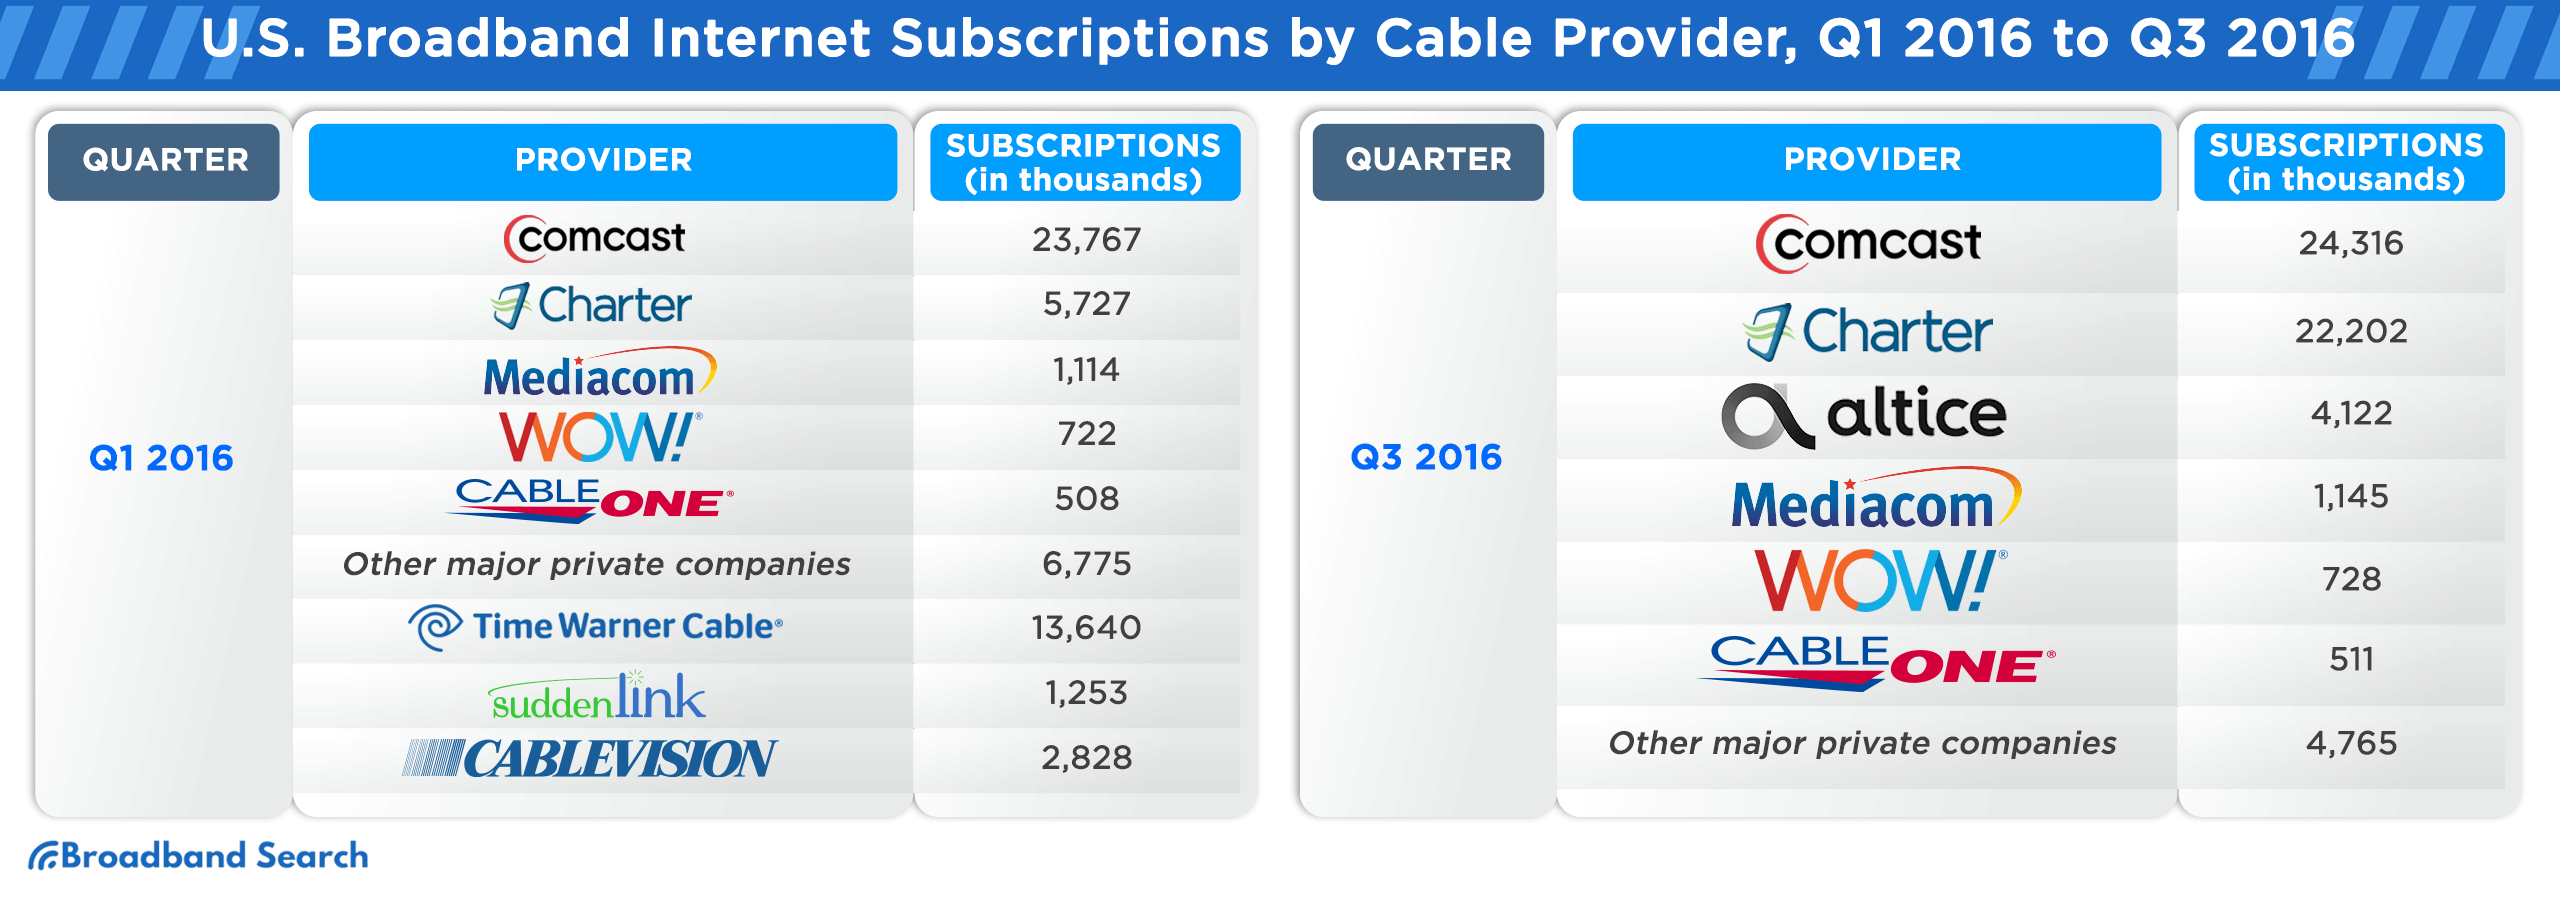 U.S. Broadband Internet Subscriptions by cable provider for quarters one to three of 2016